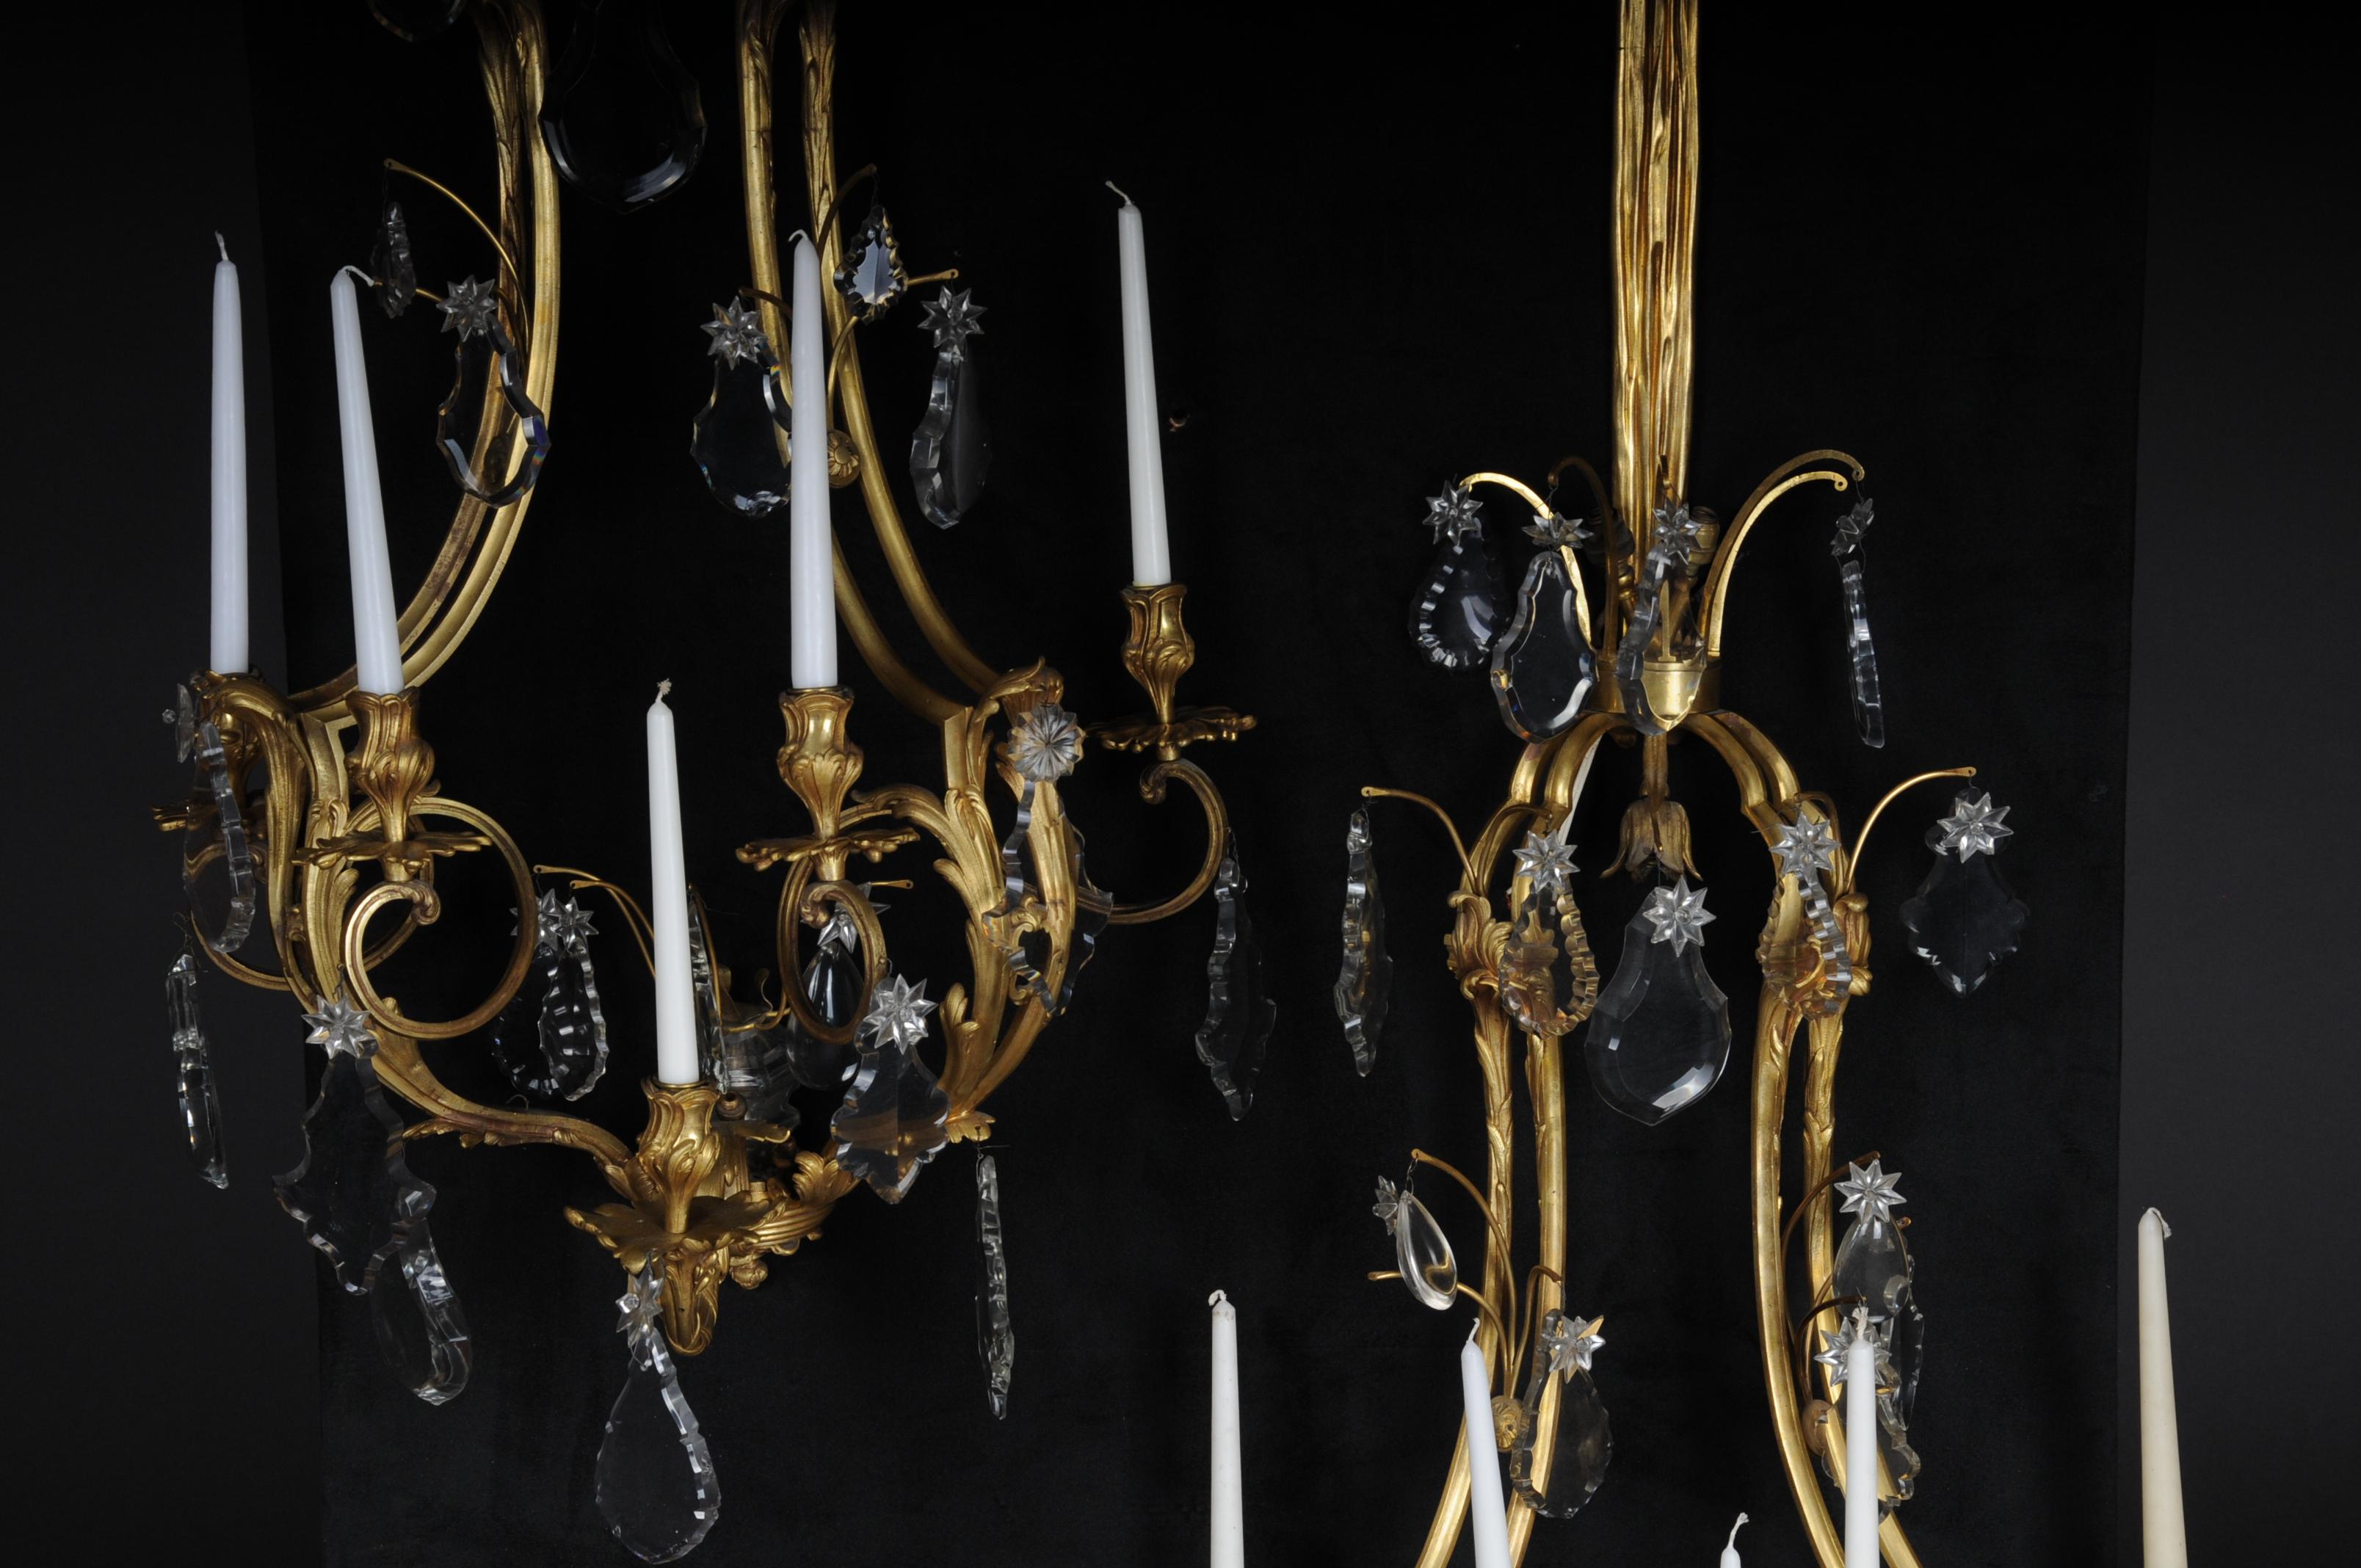 A pair of bronze splendor wall appliqués / sconces, Paris, 19th century

Fire gilded bronze. Five-flame frame for candles with rocaille and rosettes in relief. Colorless glass prism curtain. Three-flame top with electrification, France, 19th